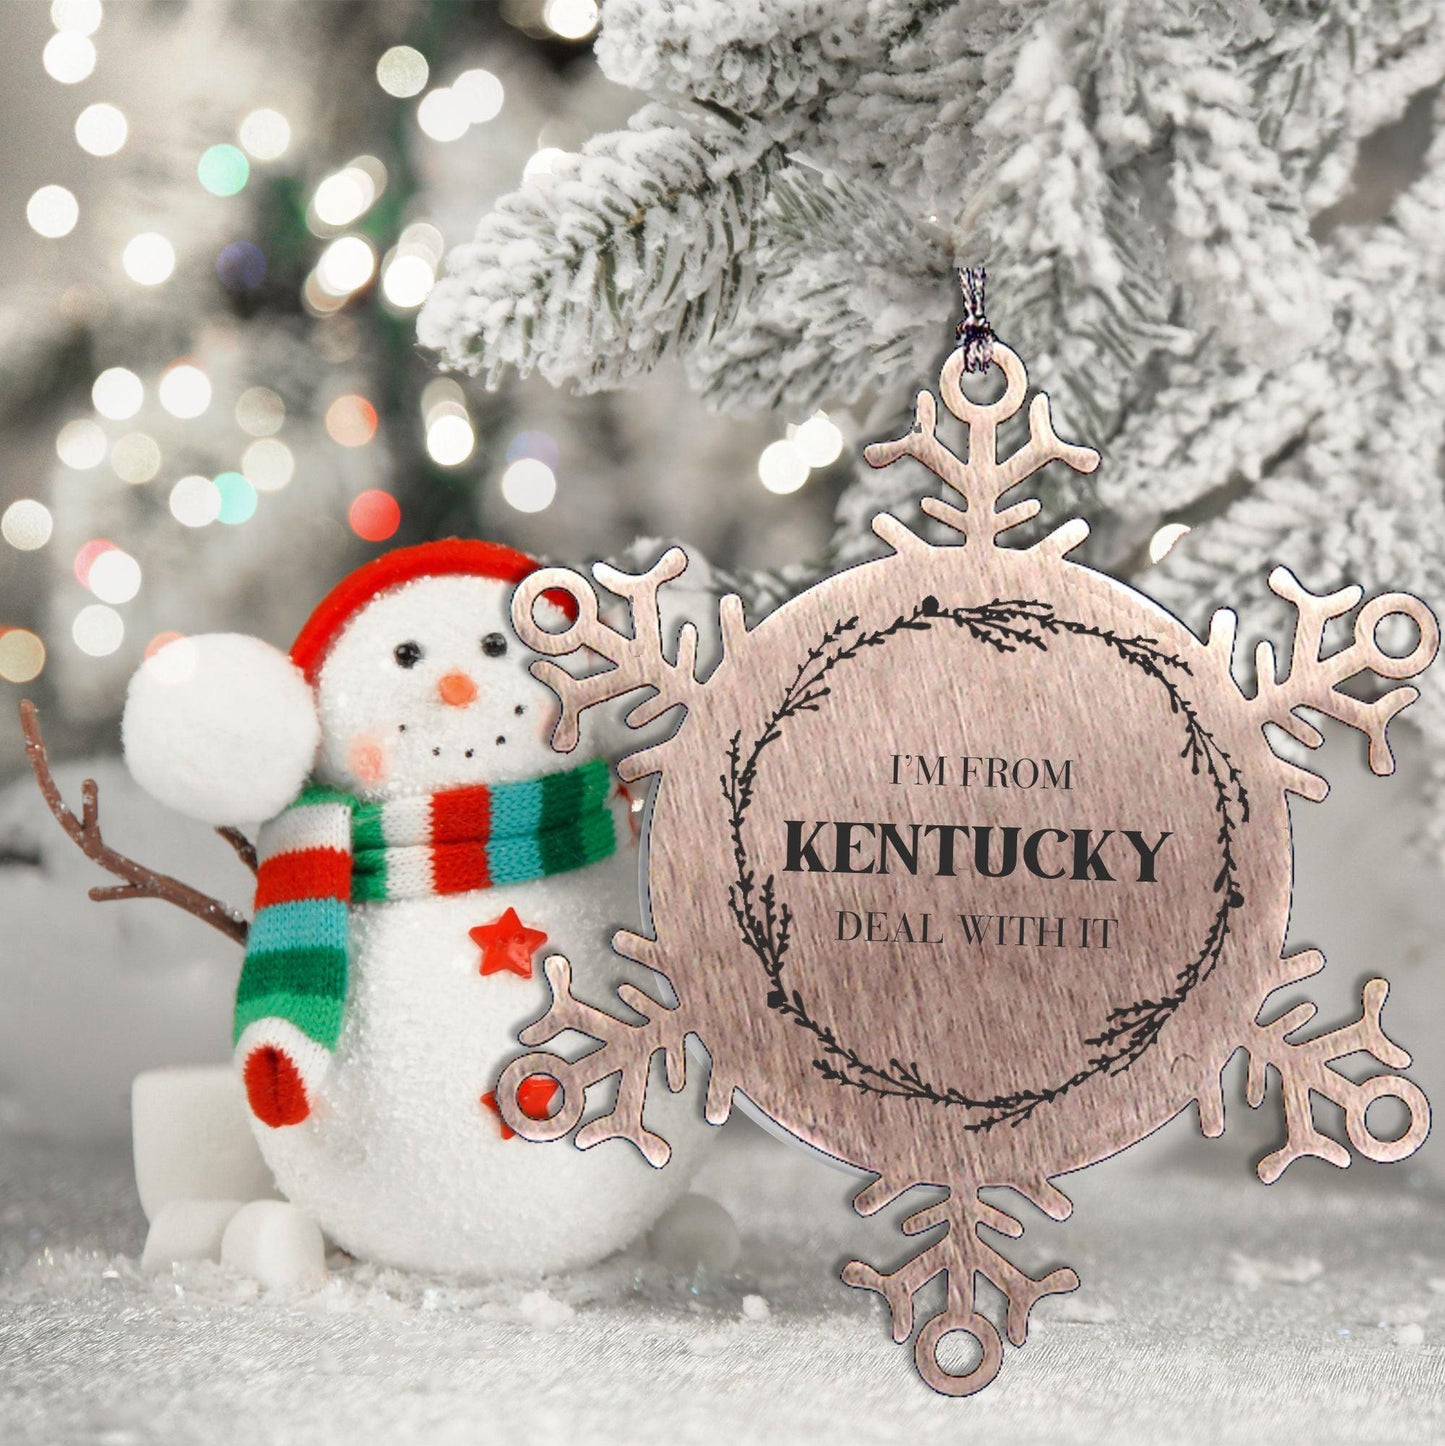 I'm from Kentucky, Deal with it, Proud Kentucky State Ornament Gifts, Kentucky Snowflake Ornament Gift Idea, Christmas Gifts for Kentucky People, Coworkers, Colleague - Mallard Moon Gift Shop